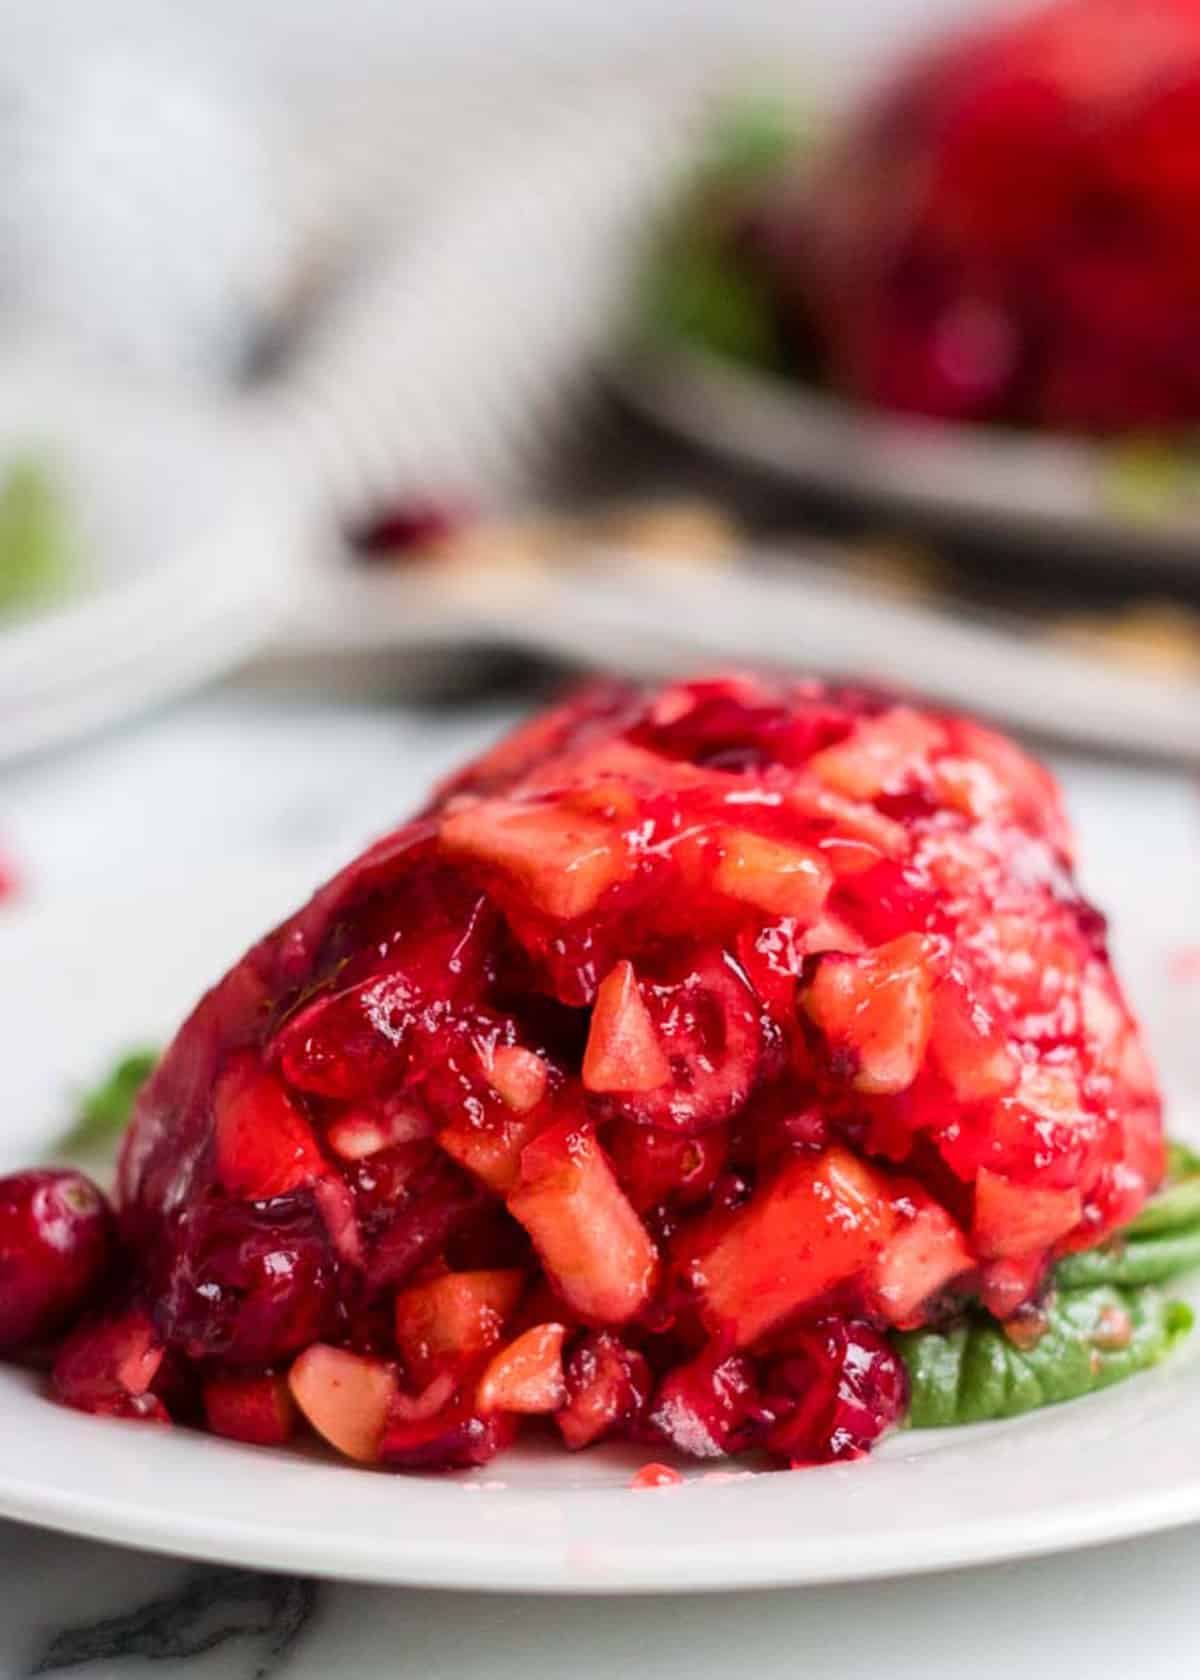 Portion of cranberry salad on a plate.